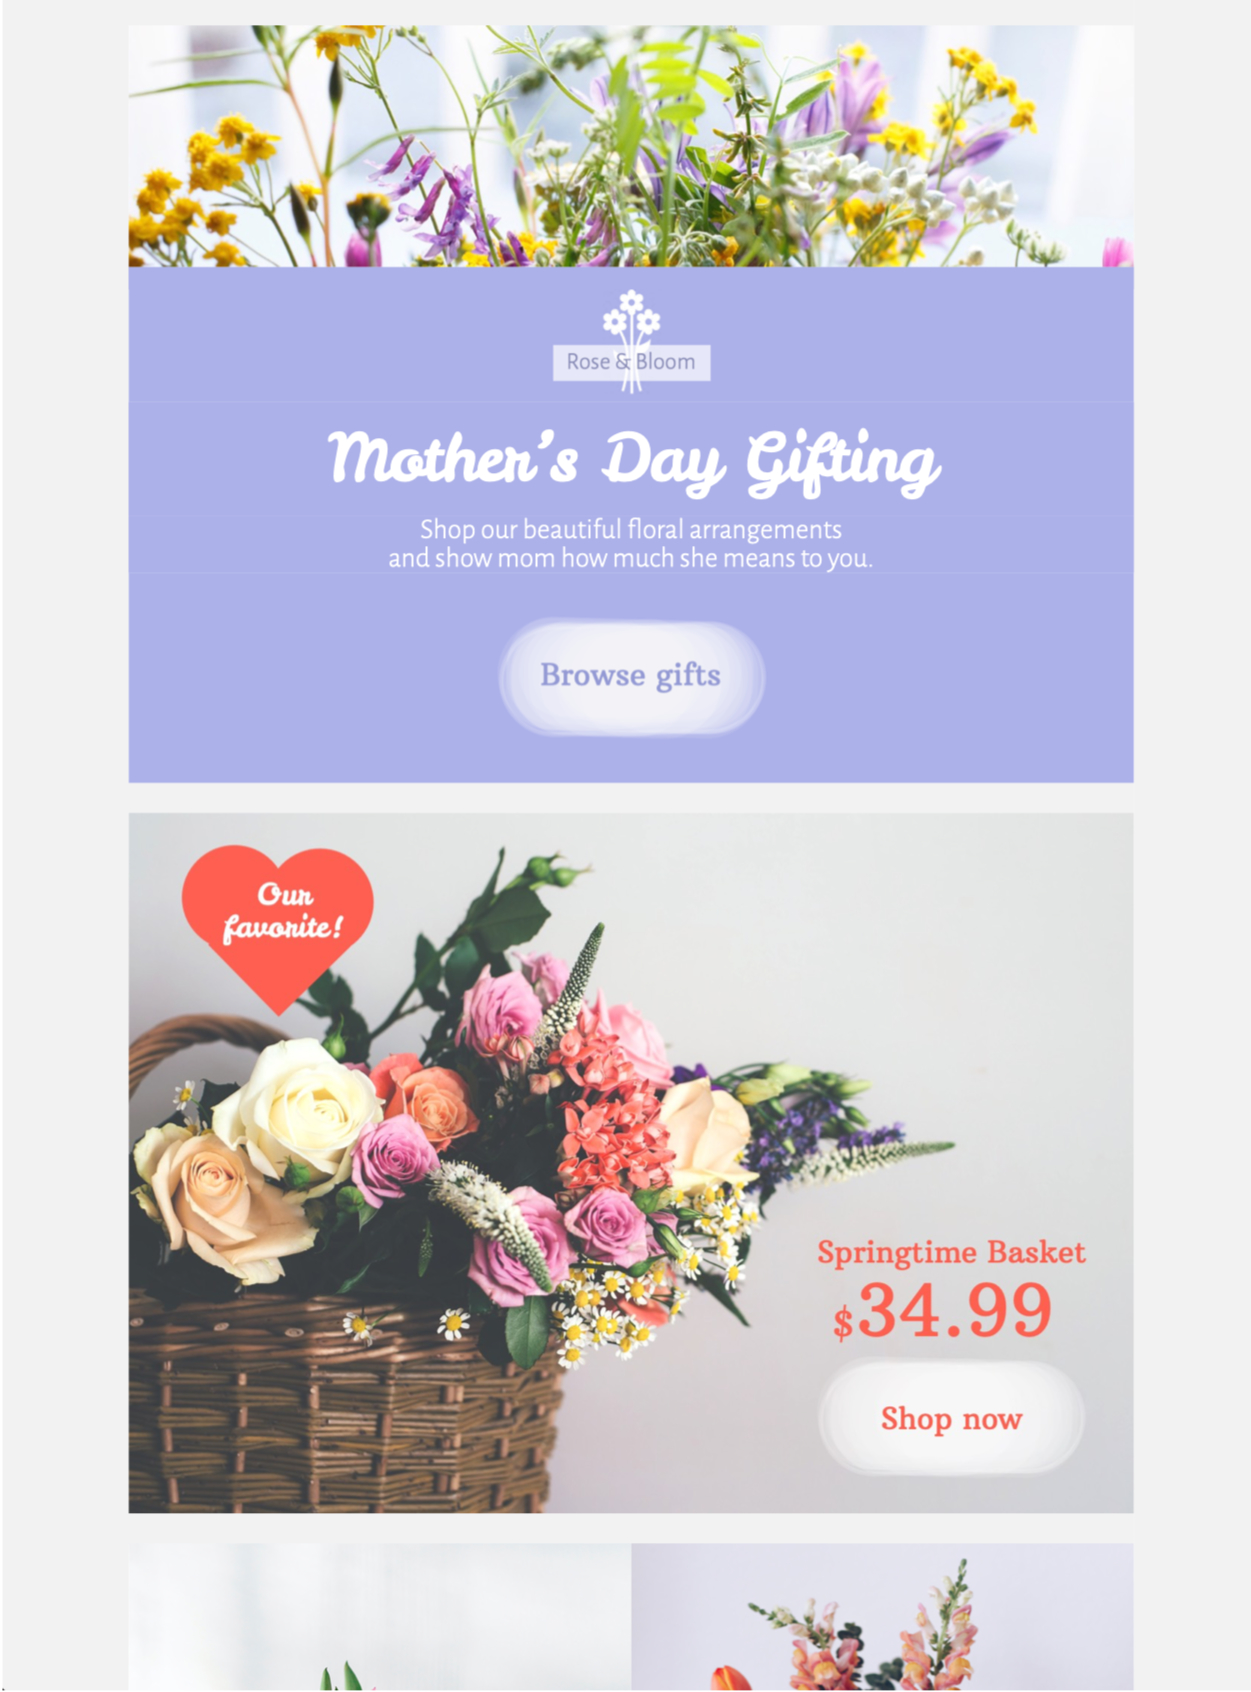 html email template for mother's day